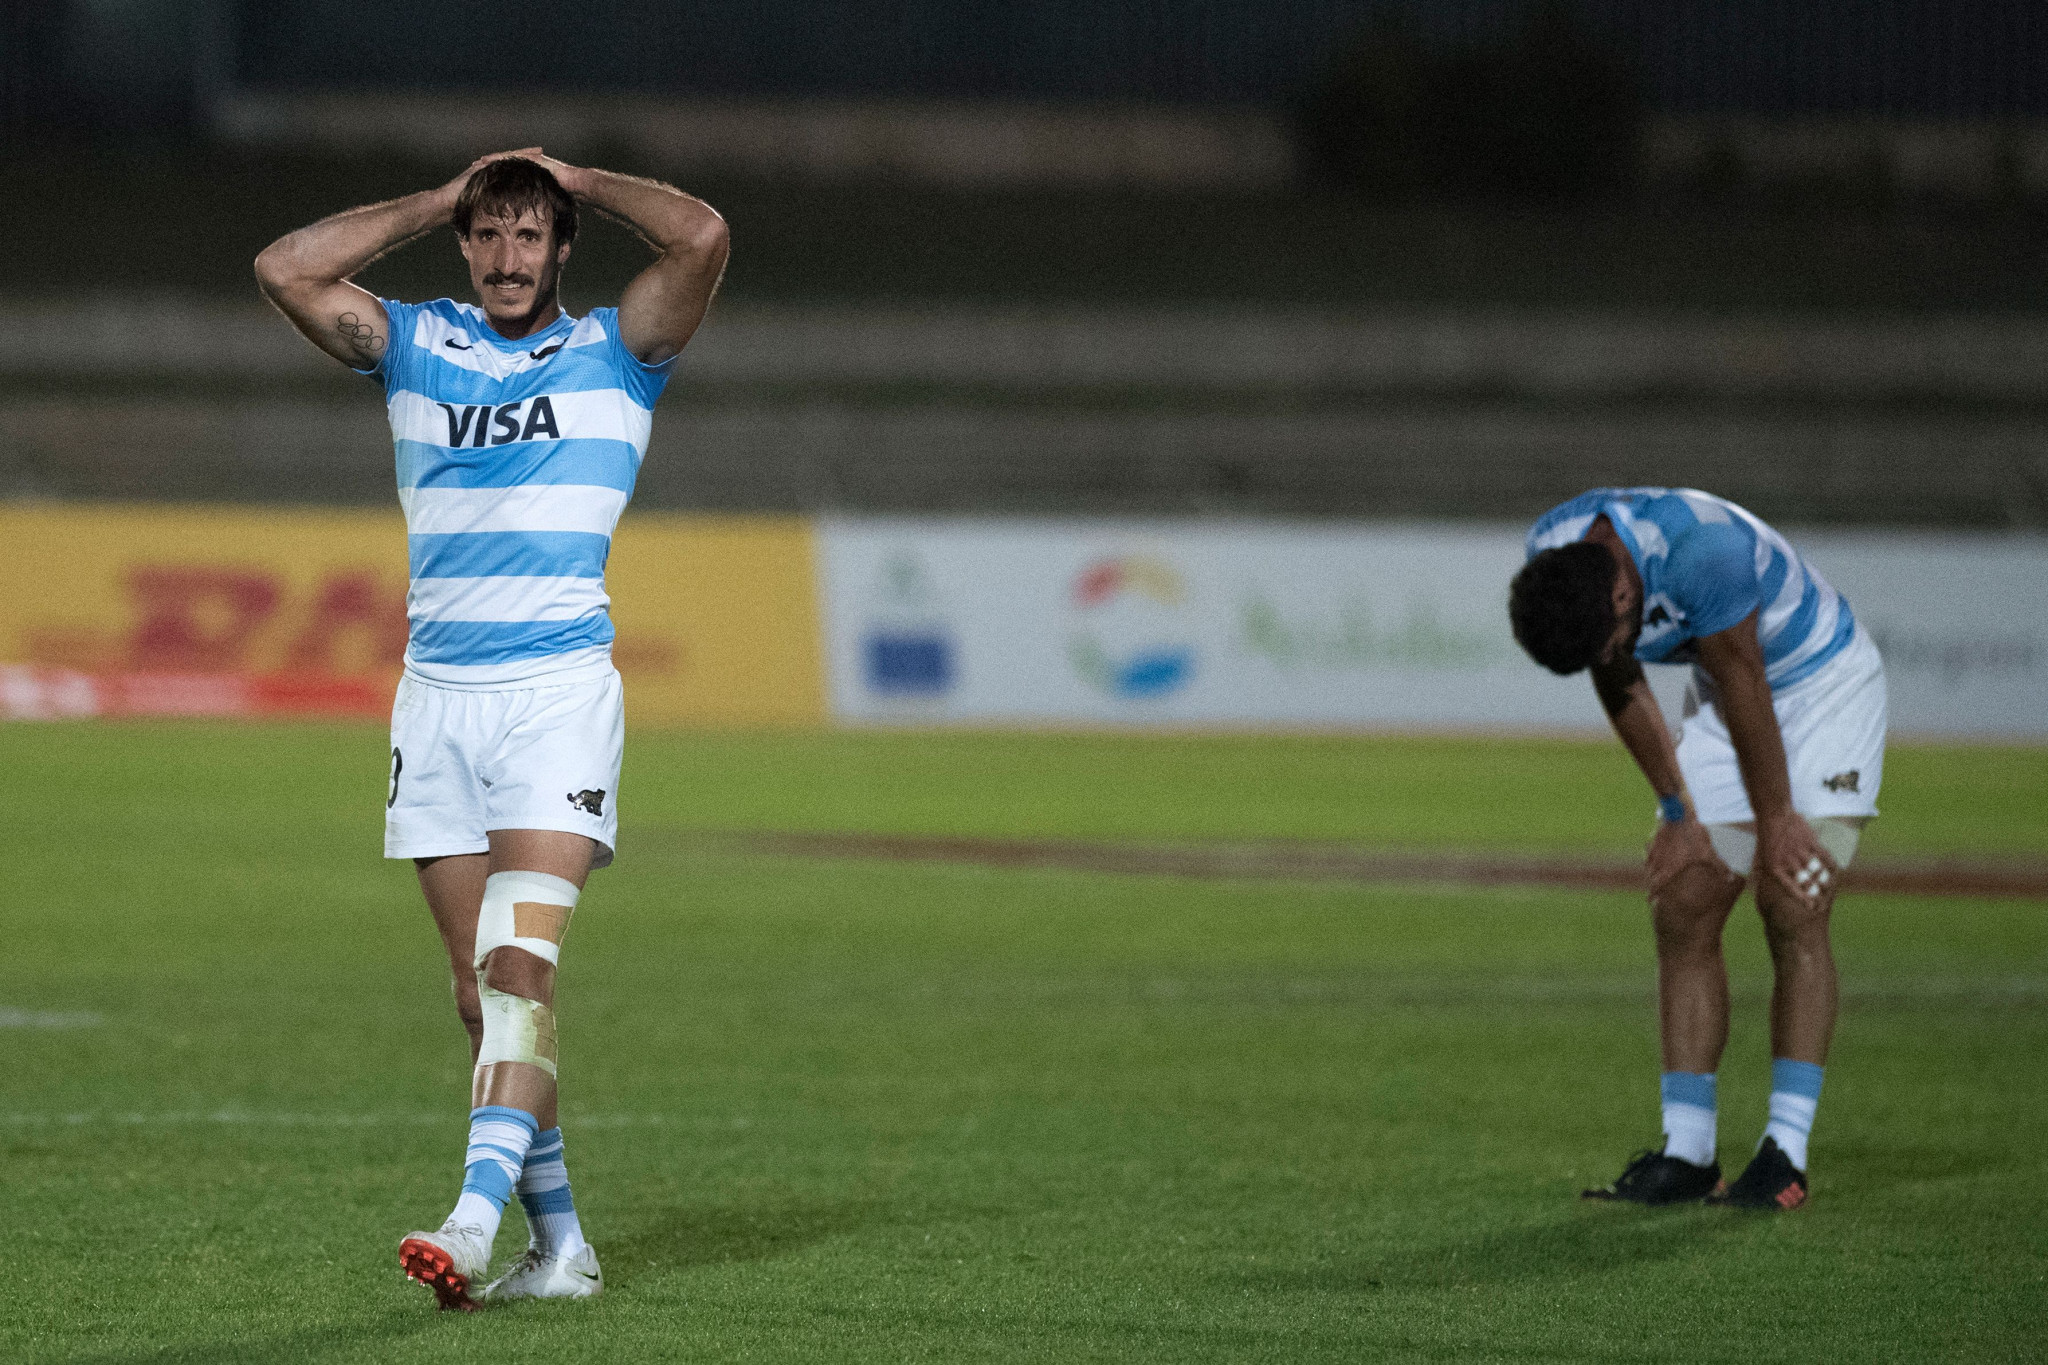 Argentina and England cause controversy at men's World Rugby Sevens quarter-finals